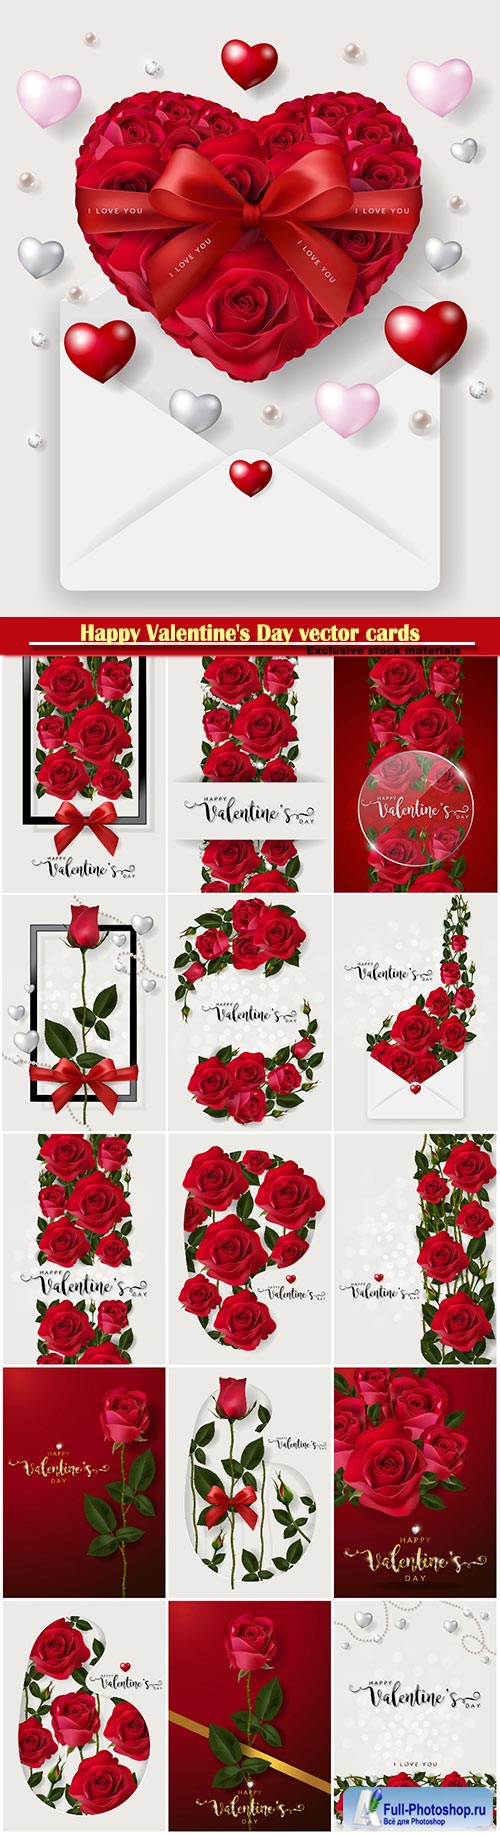 Happy Valentine's Day vector cards, red roses and hearts, romantic backgrounds # 3